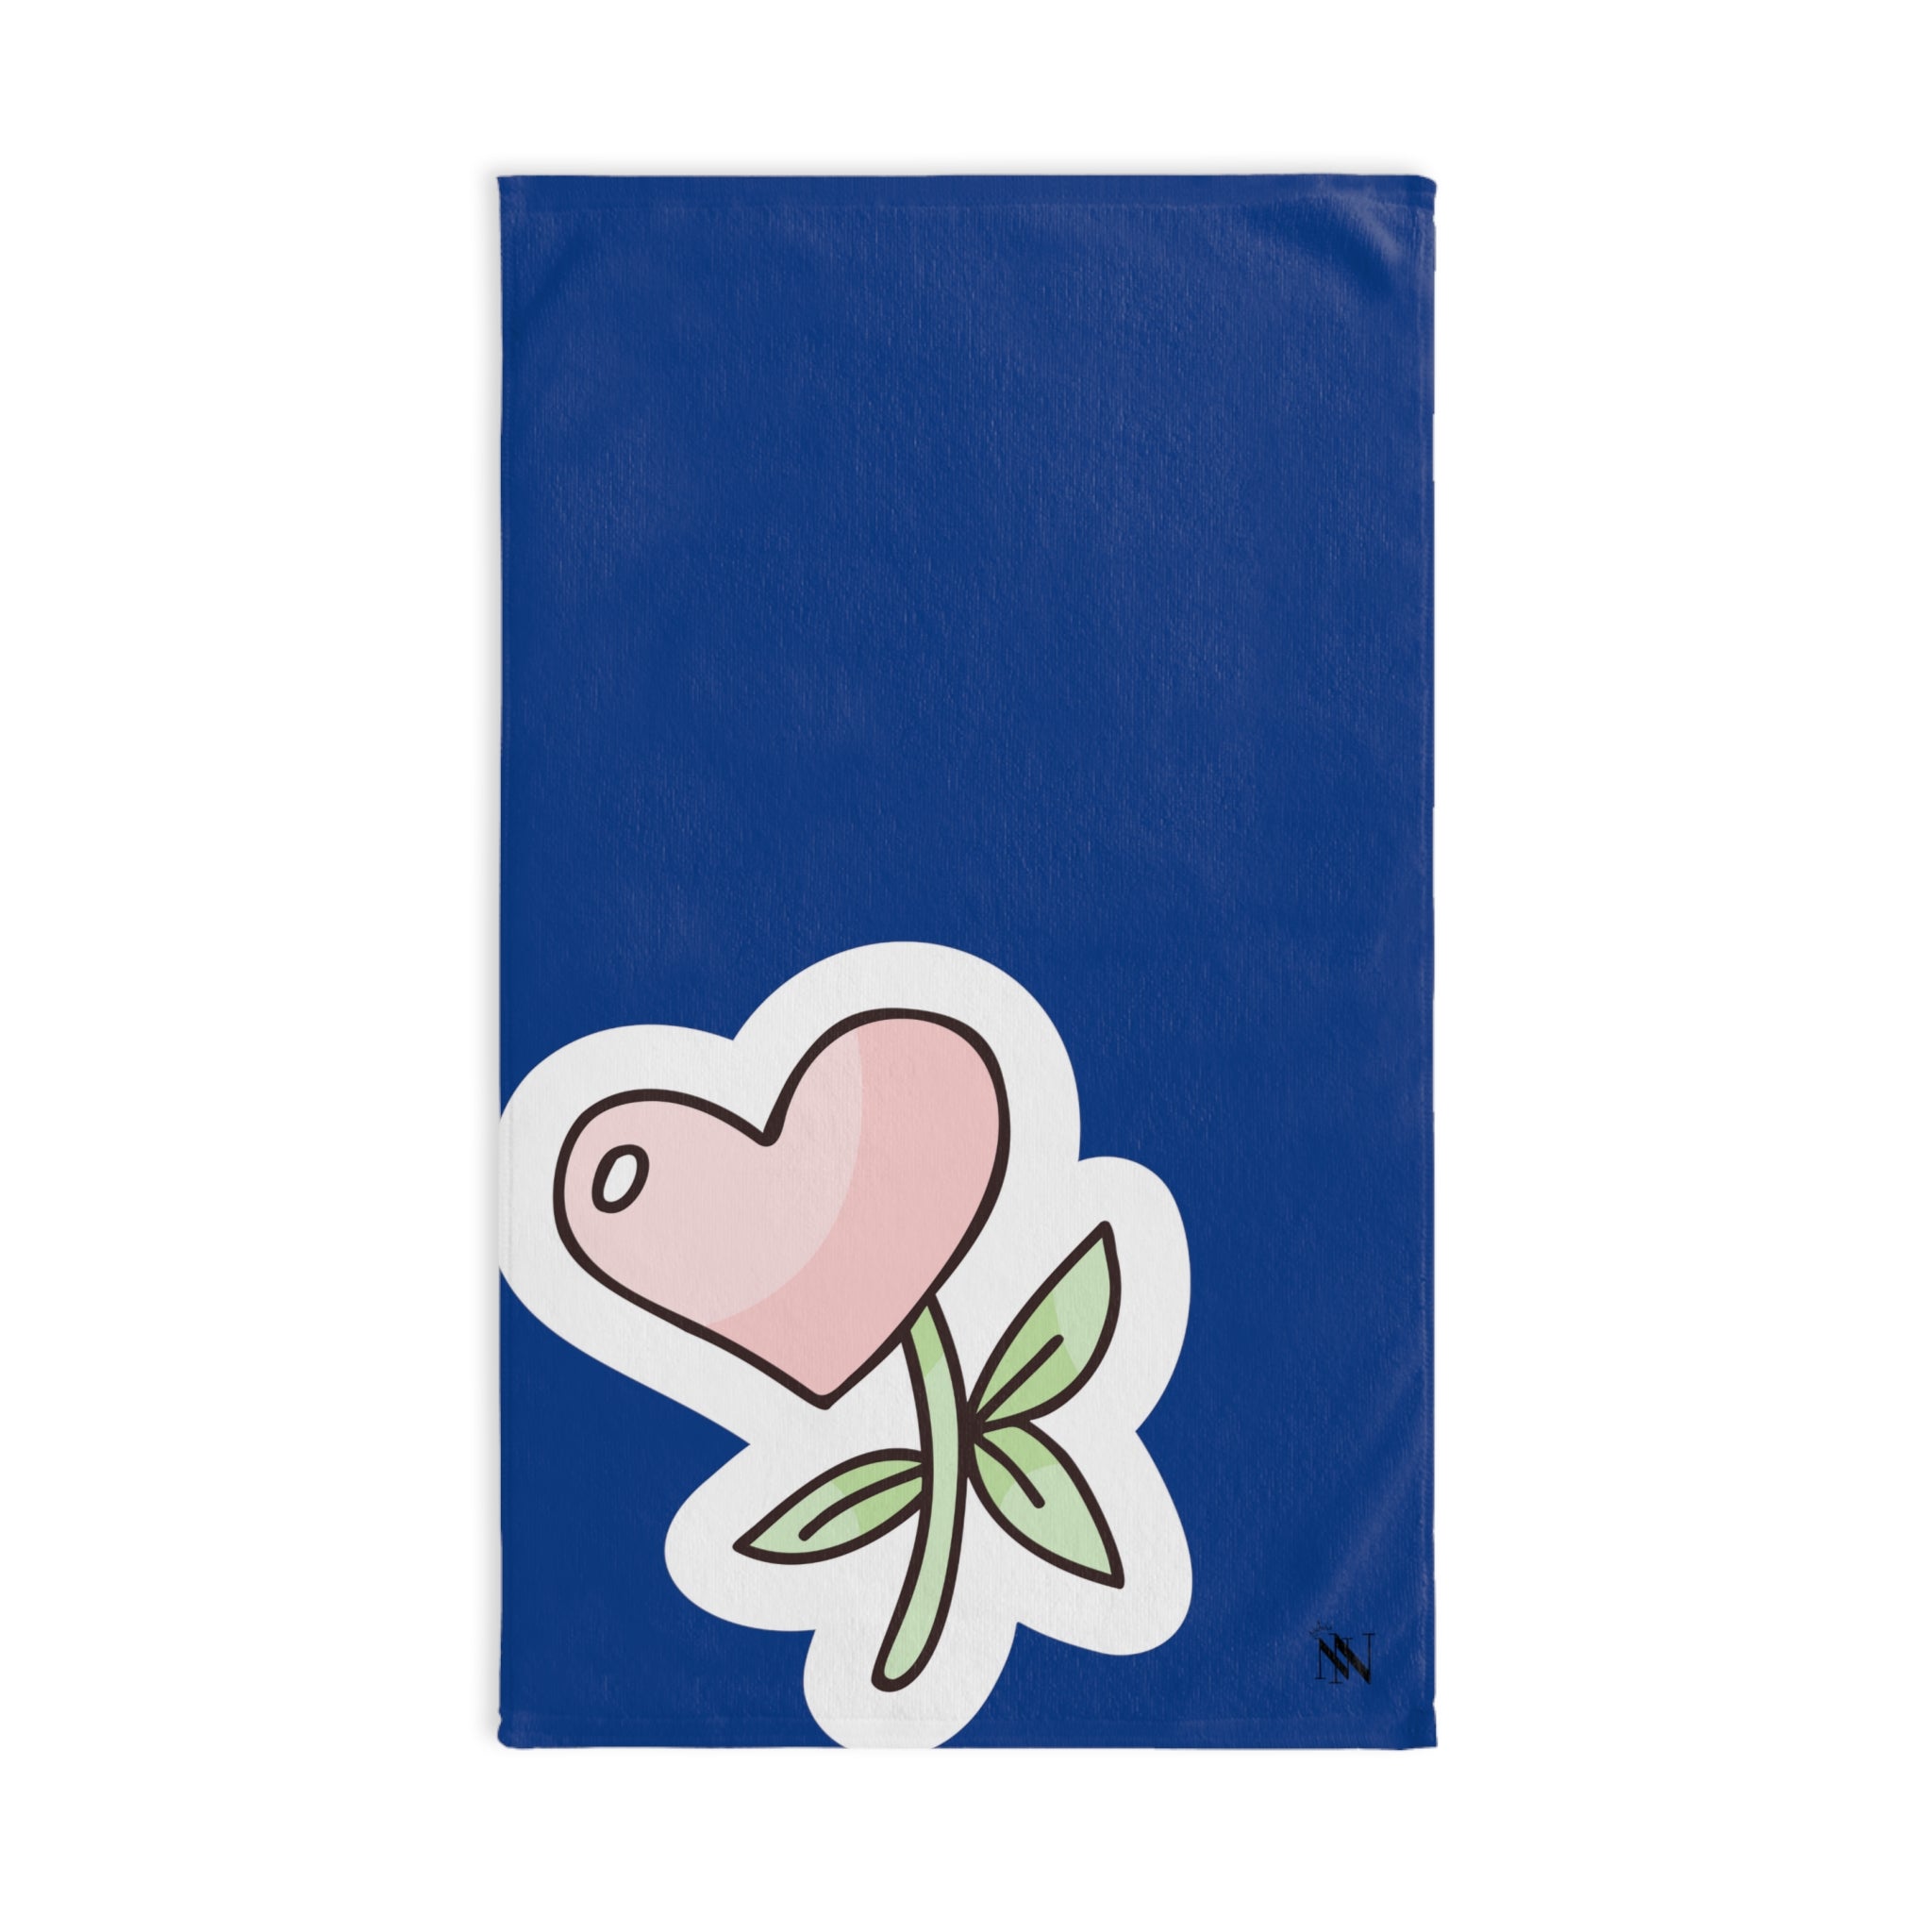 Flower Sticker Heart Blue | Gifts for Boyfriend, Funny Towel Romantic Gift for Wedding Couple Fiance First Year Anniversary Valentines, Party Gag Gifts, Joke Humor Cloth for Husband Men BF NECTAR NAPKINS